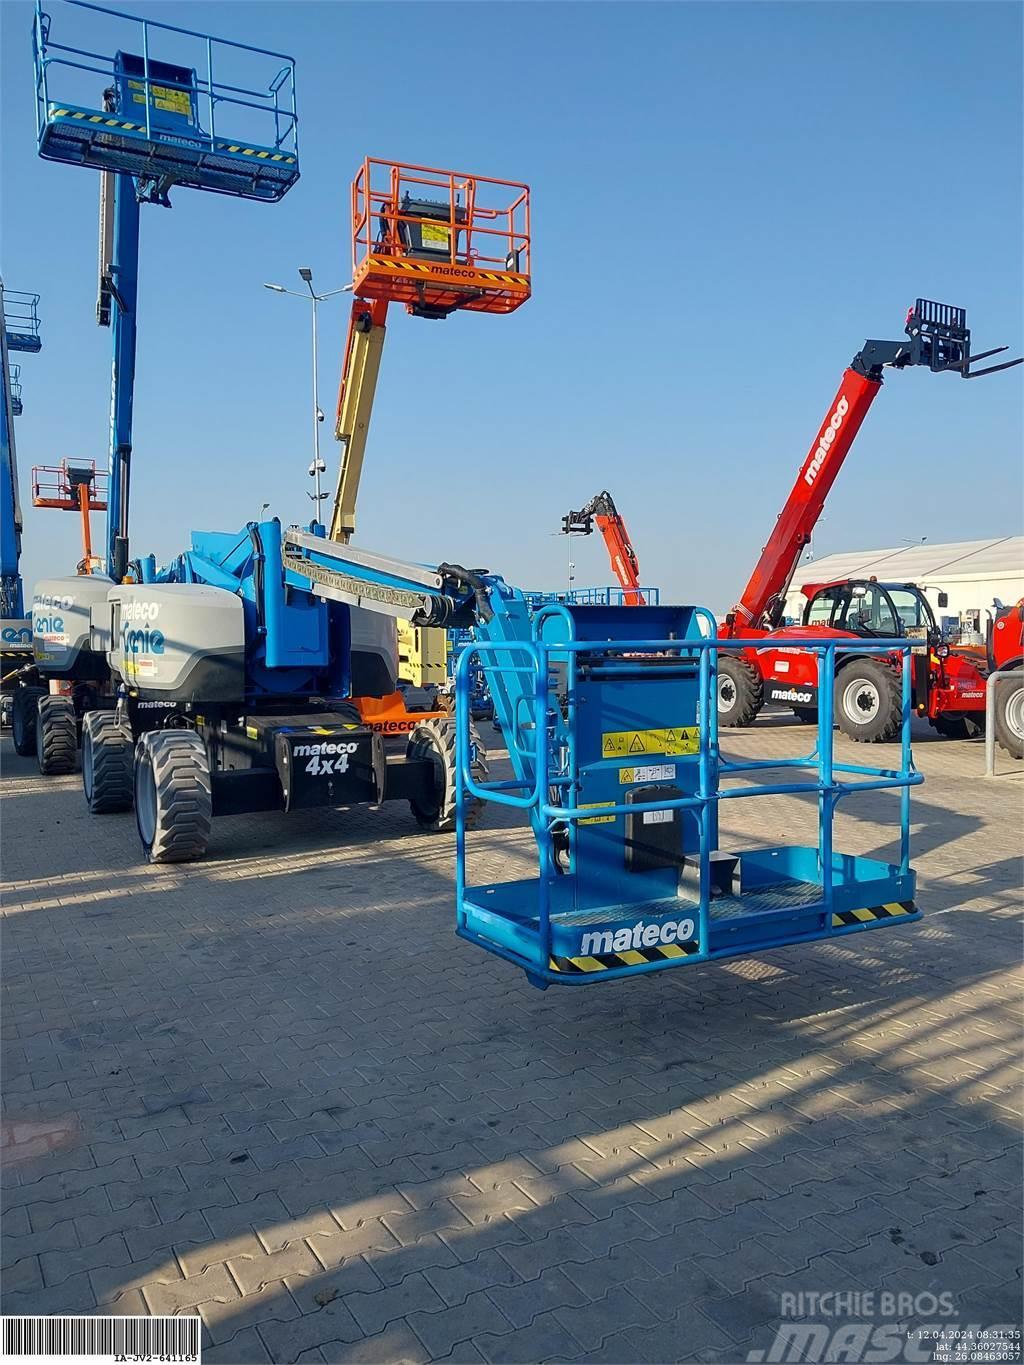 Genie Z-60/37 FE Articulated boom lifts